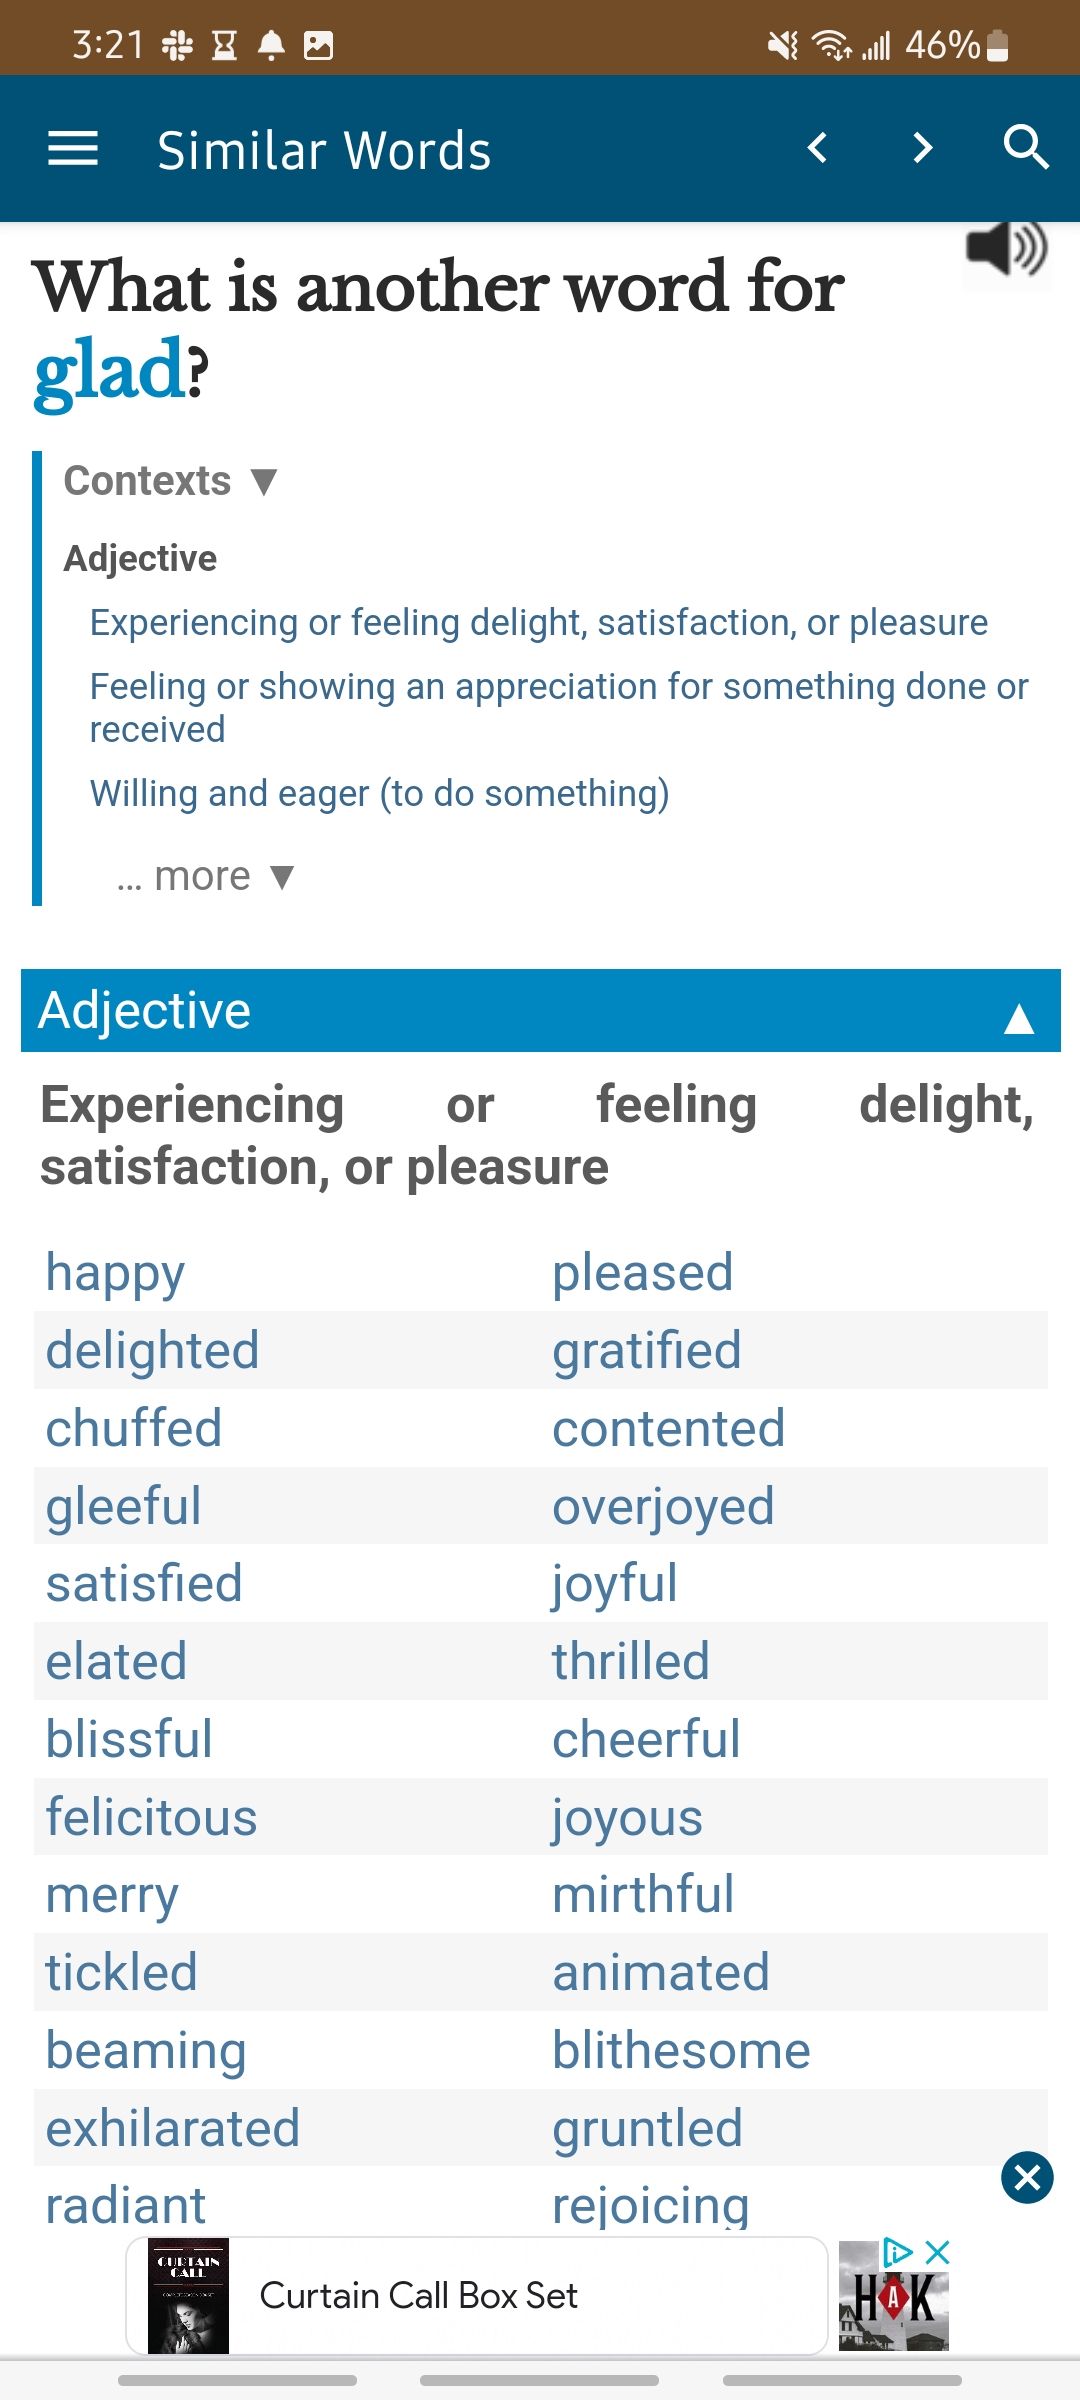 Synonyms for the word glad in the Word Hippo app